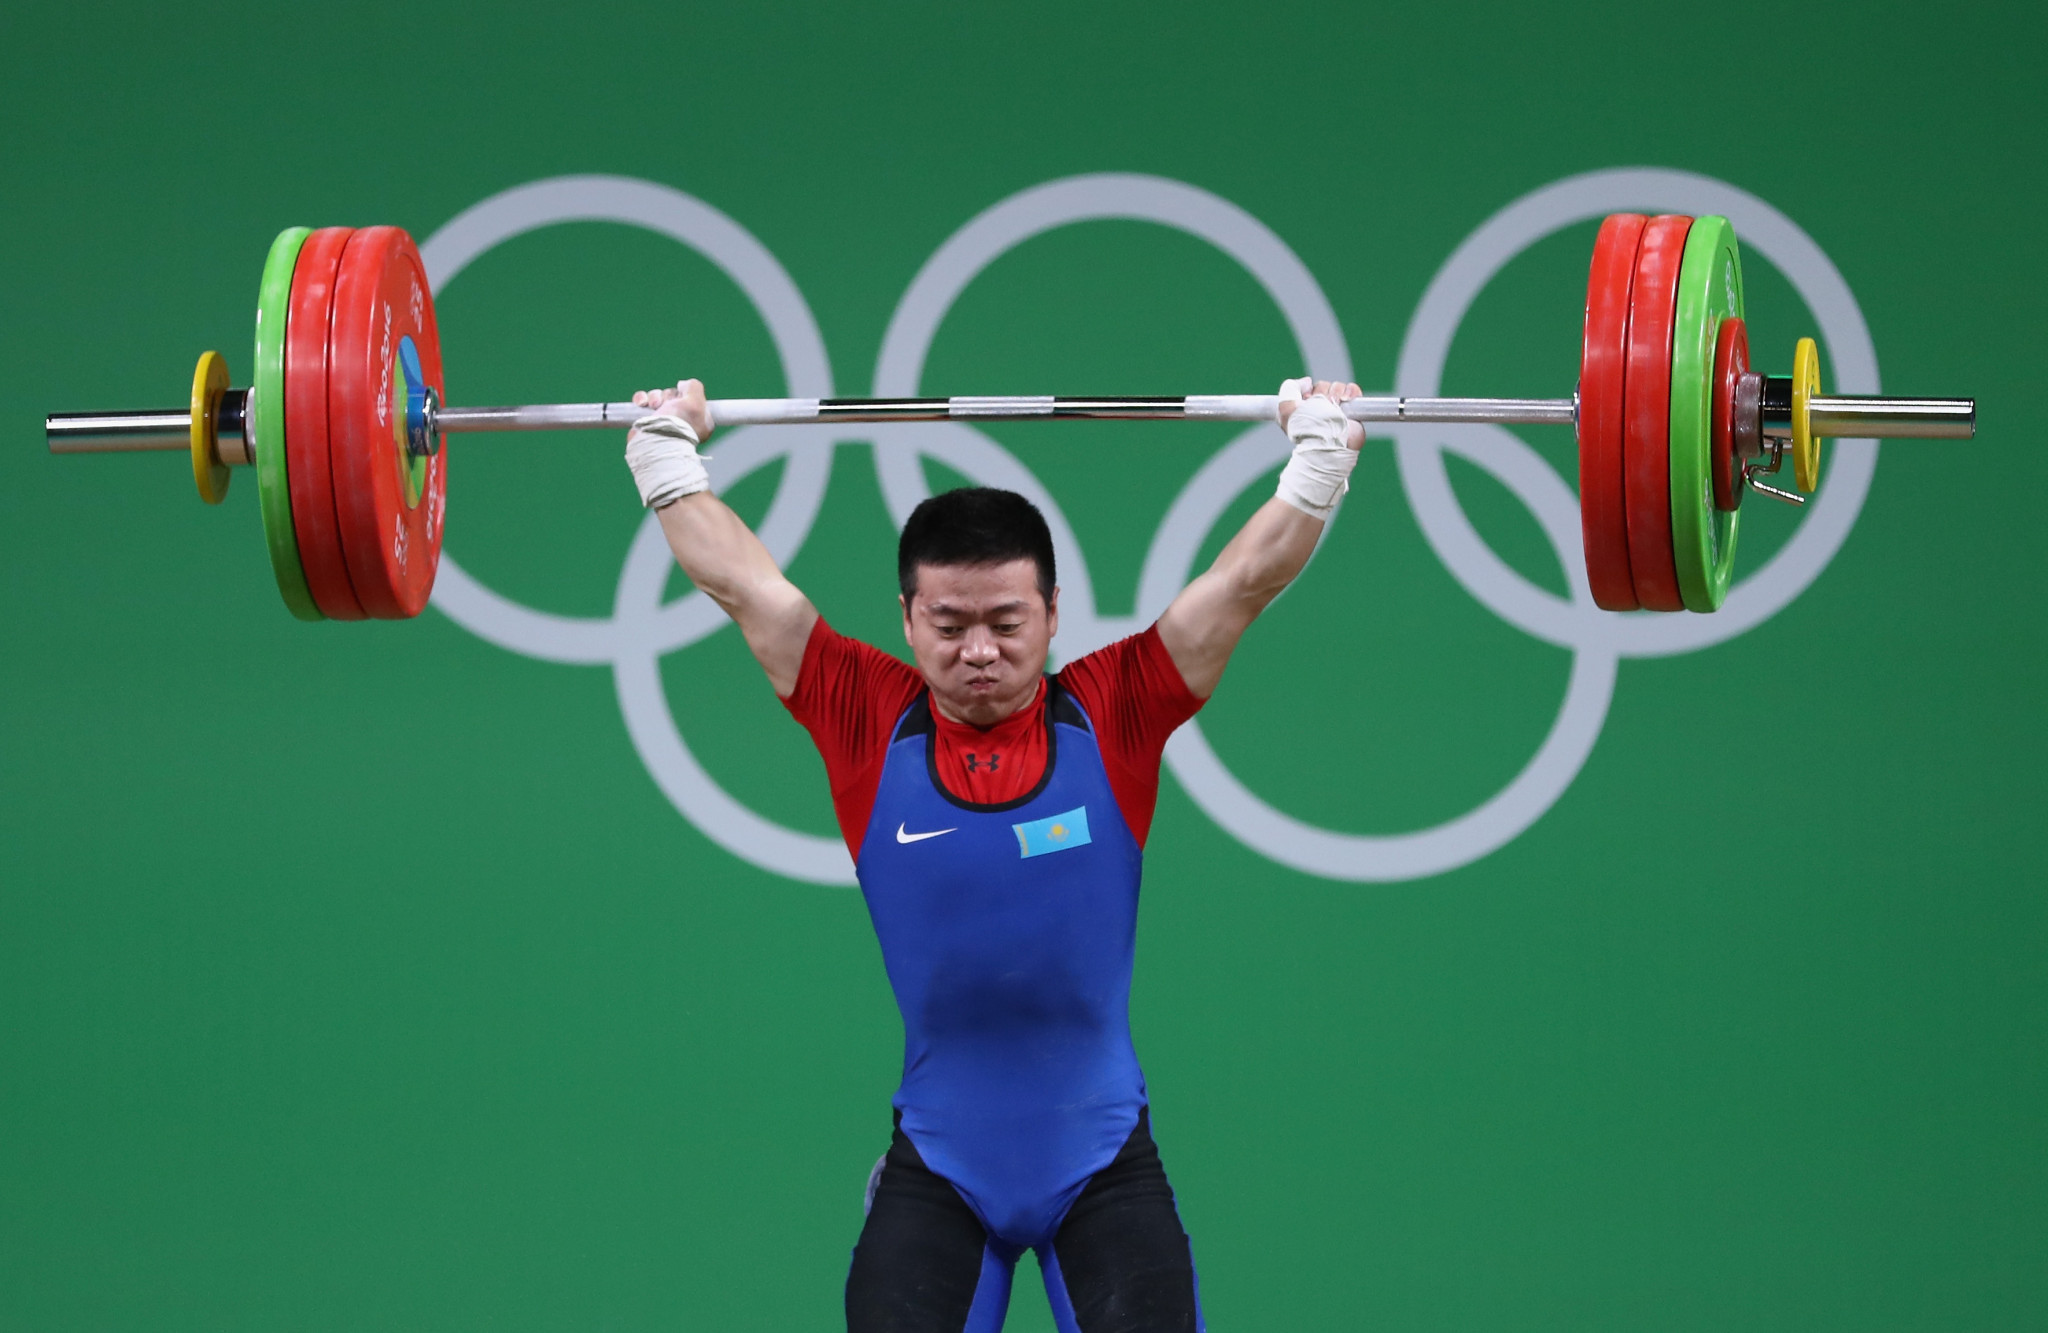 "Lost in space" Bulgarians start recovery mission with weightlifting World Championships medal